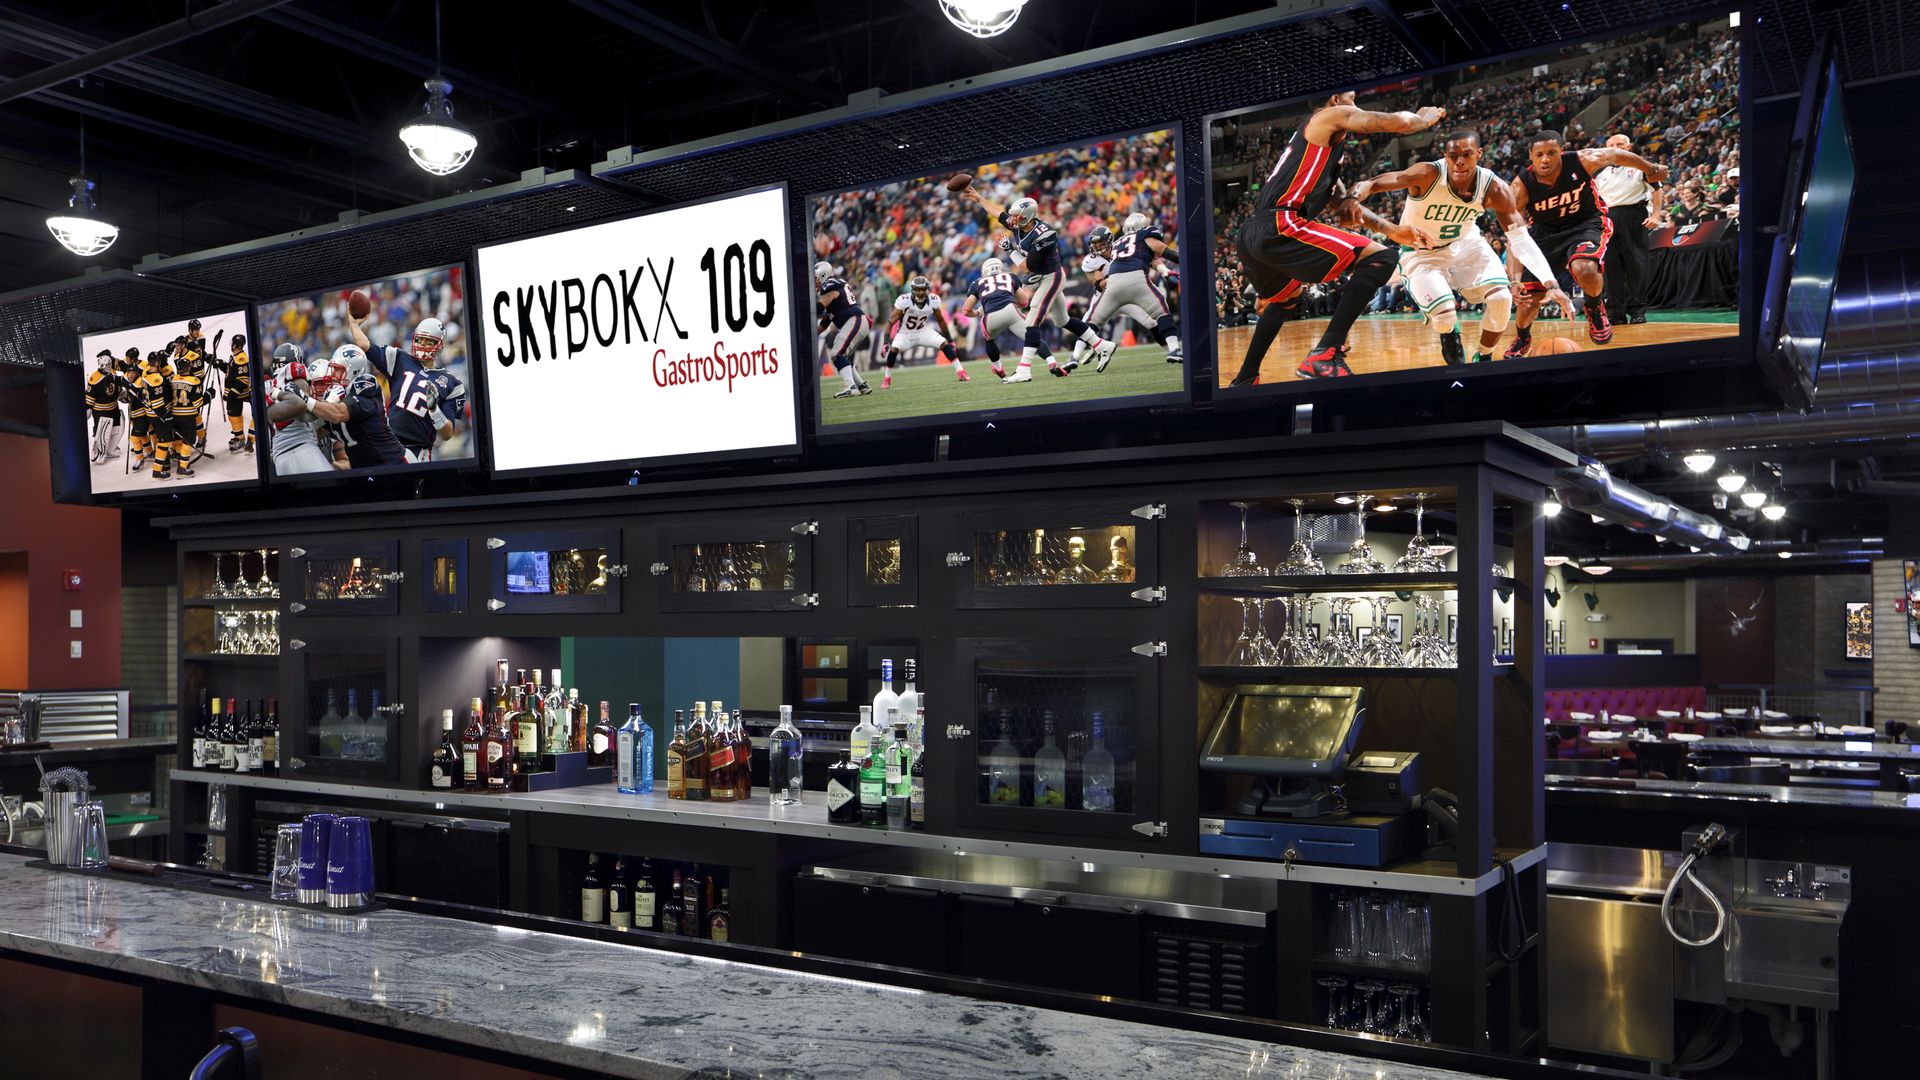 SKYBOKX 109 Sports Bar & Grill in Natick has the game on its 24 TVs. The view from the counter shows a row of five monitors above the bar.